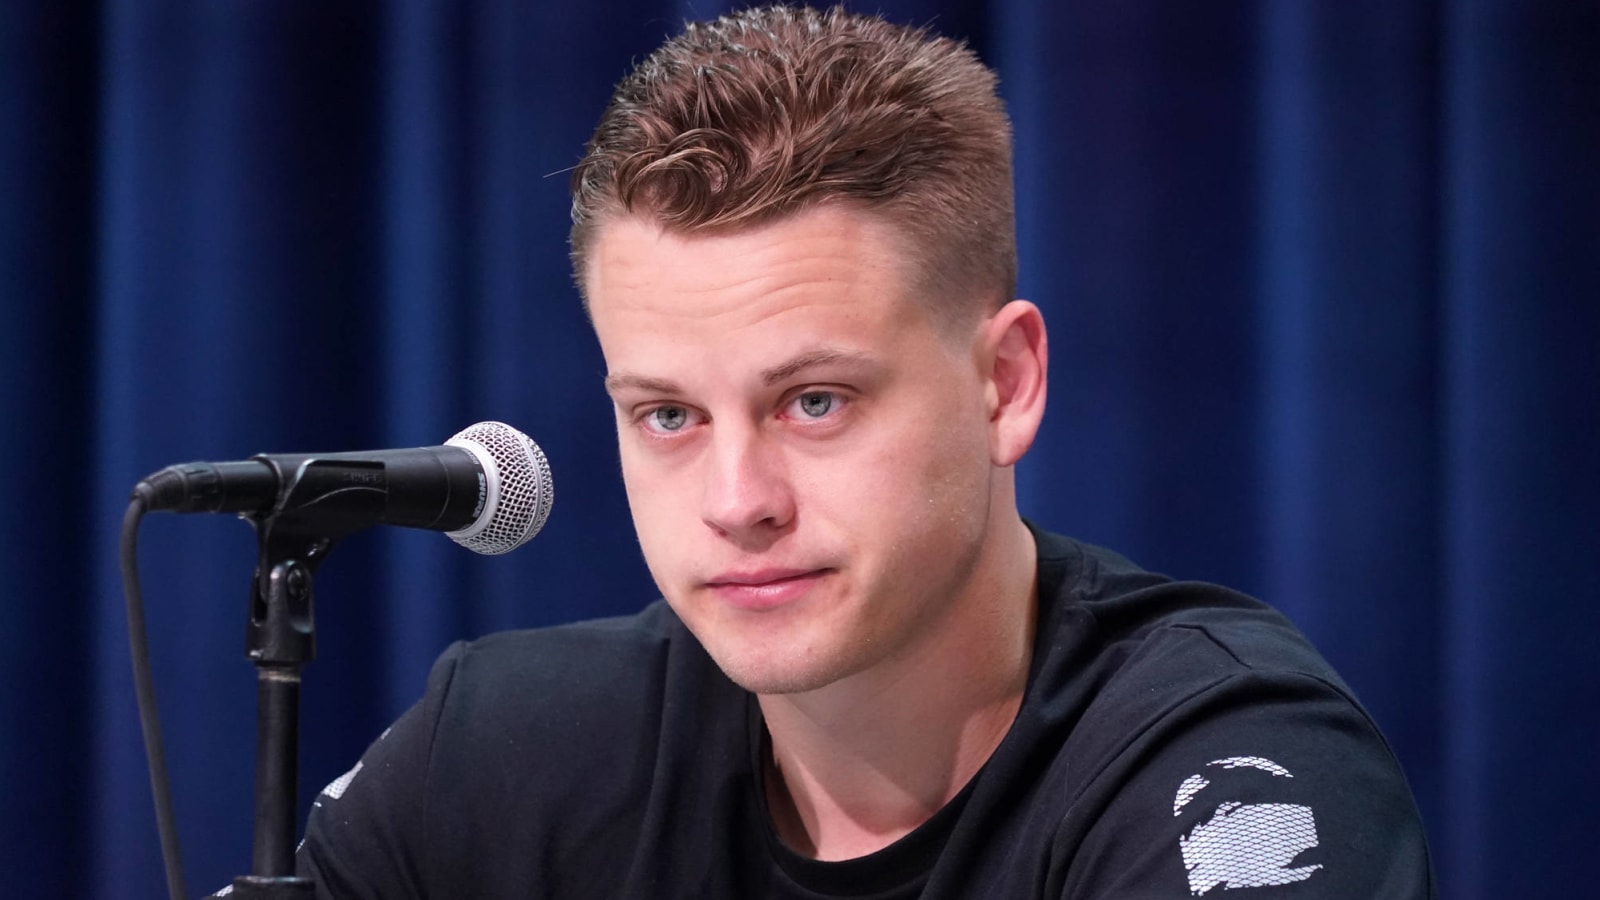 Joe Burrow warns fans about stay-at-home haircut he will be rocking during draft